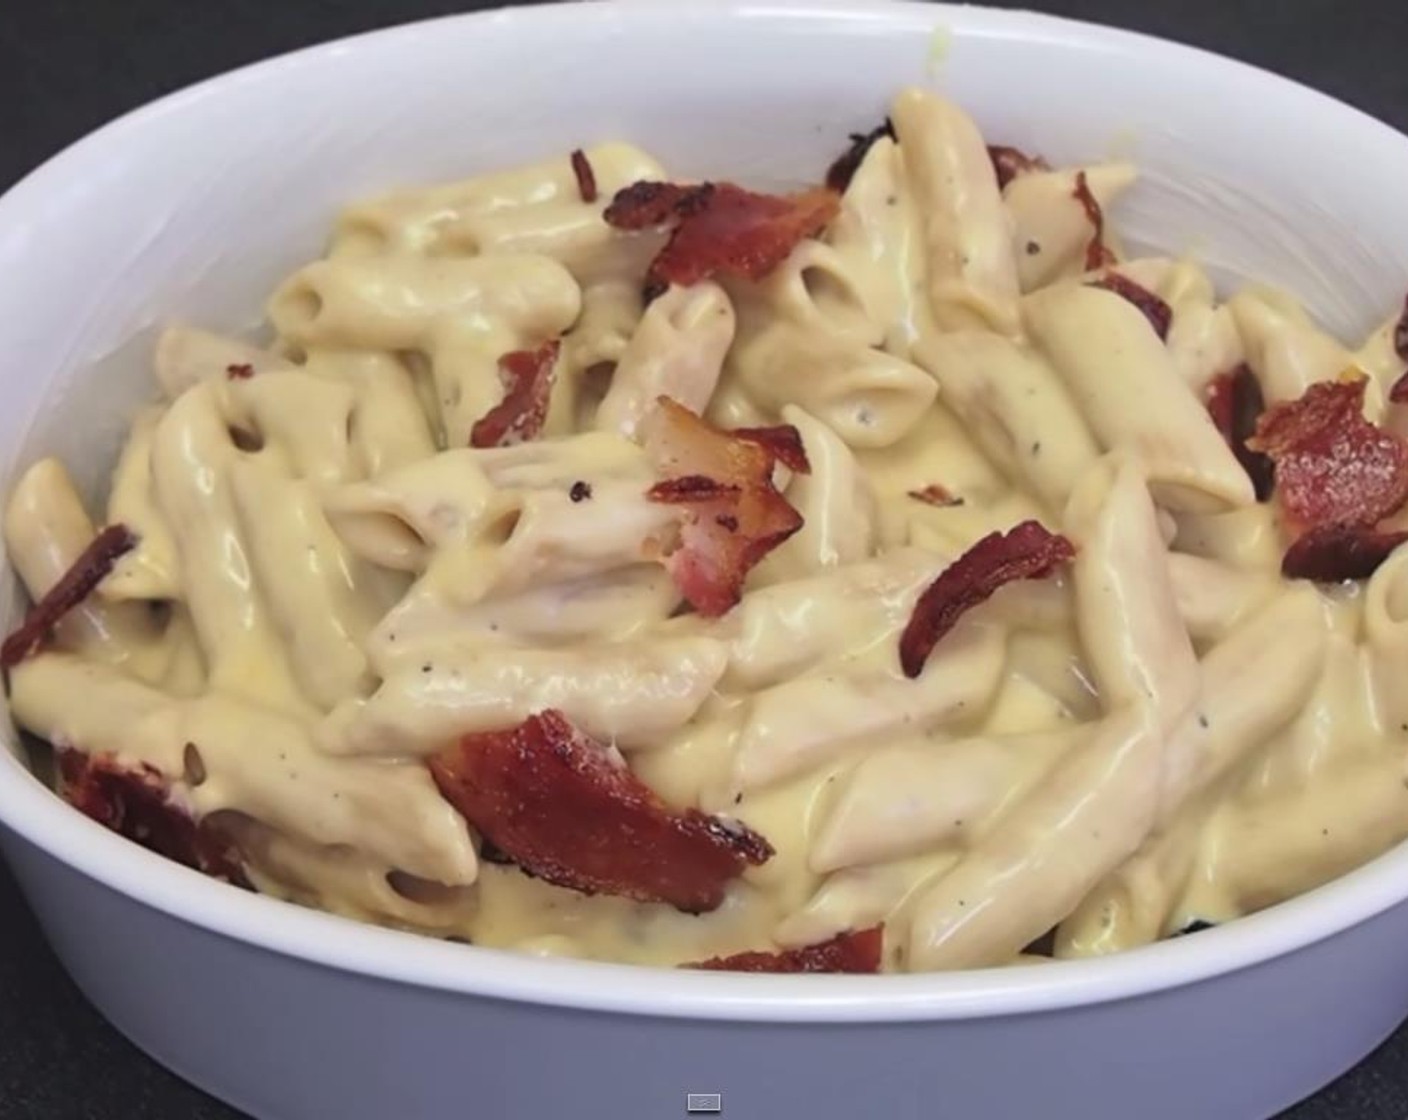 step 8 In a buttered dish, layer in pasta with crumbled bacon. Reserve some of the crumbled bacon for topping.